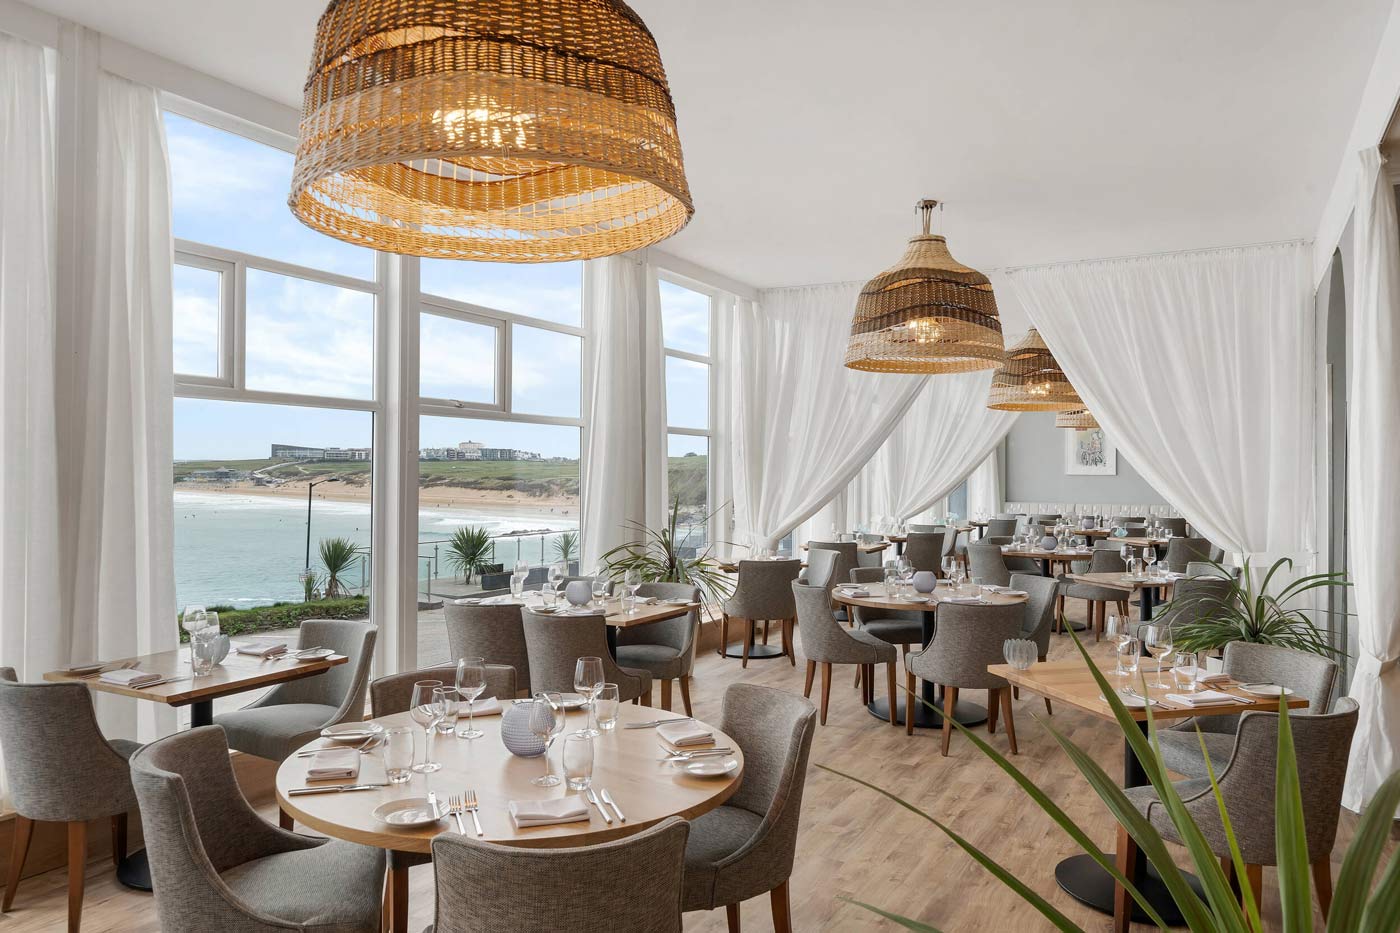 Fistral Beach Hotel and Spa, Newquay